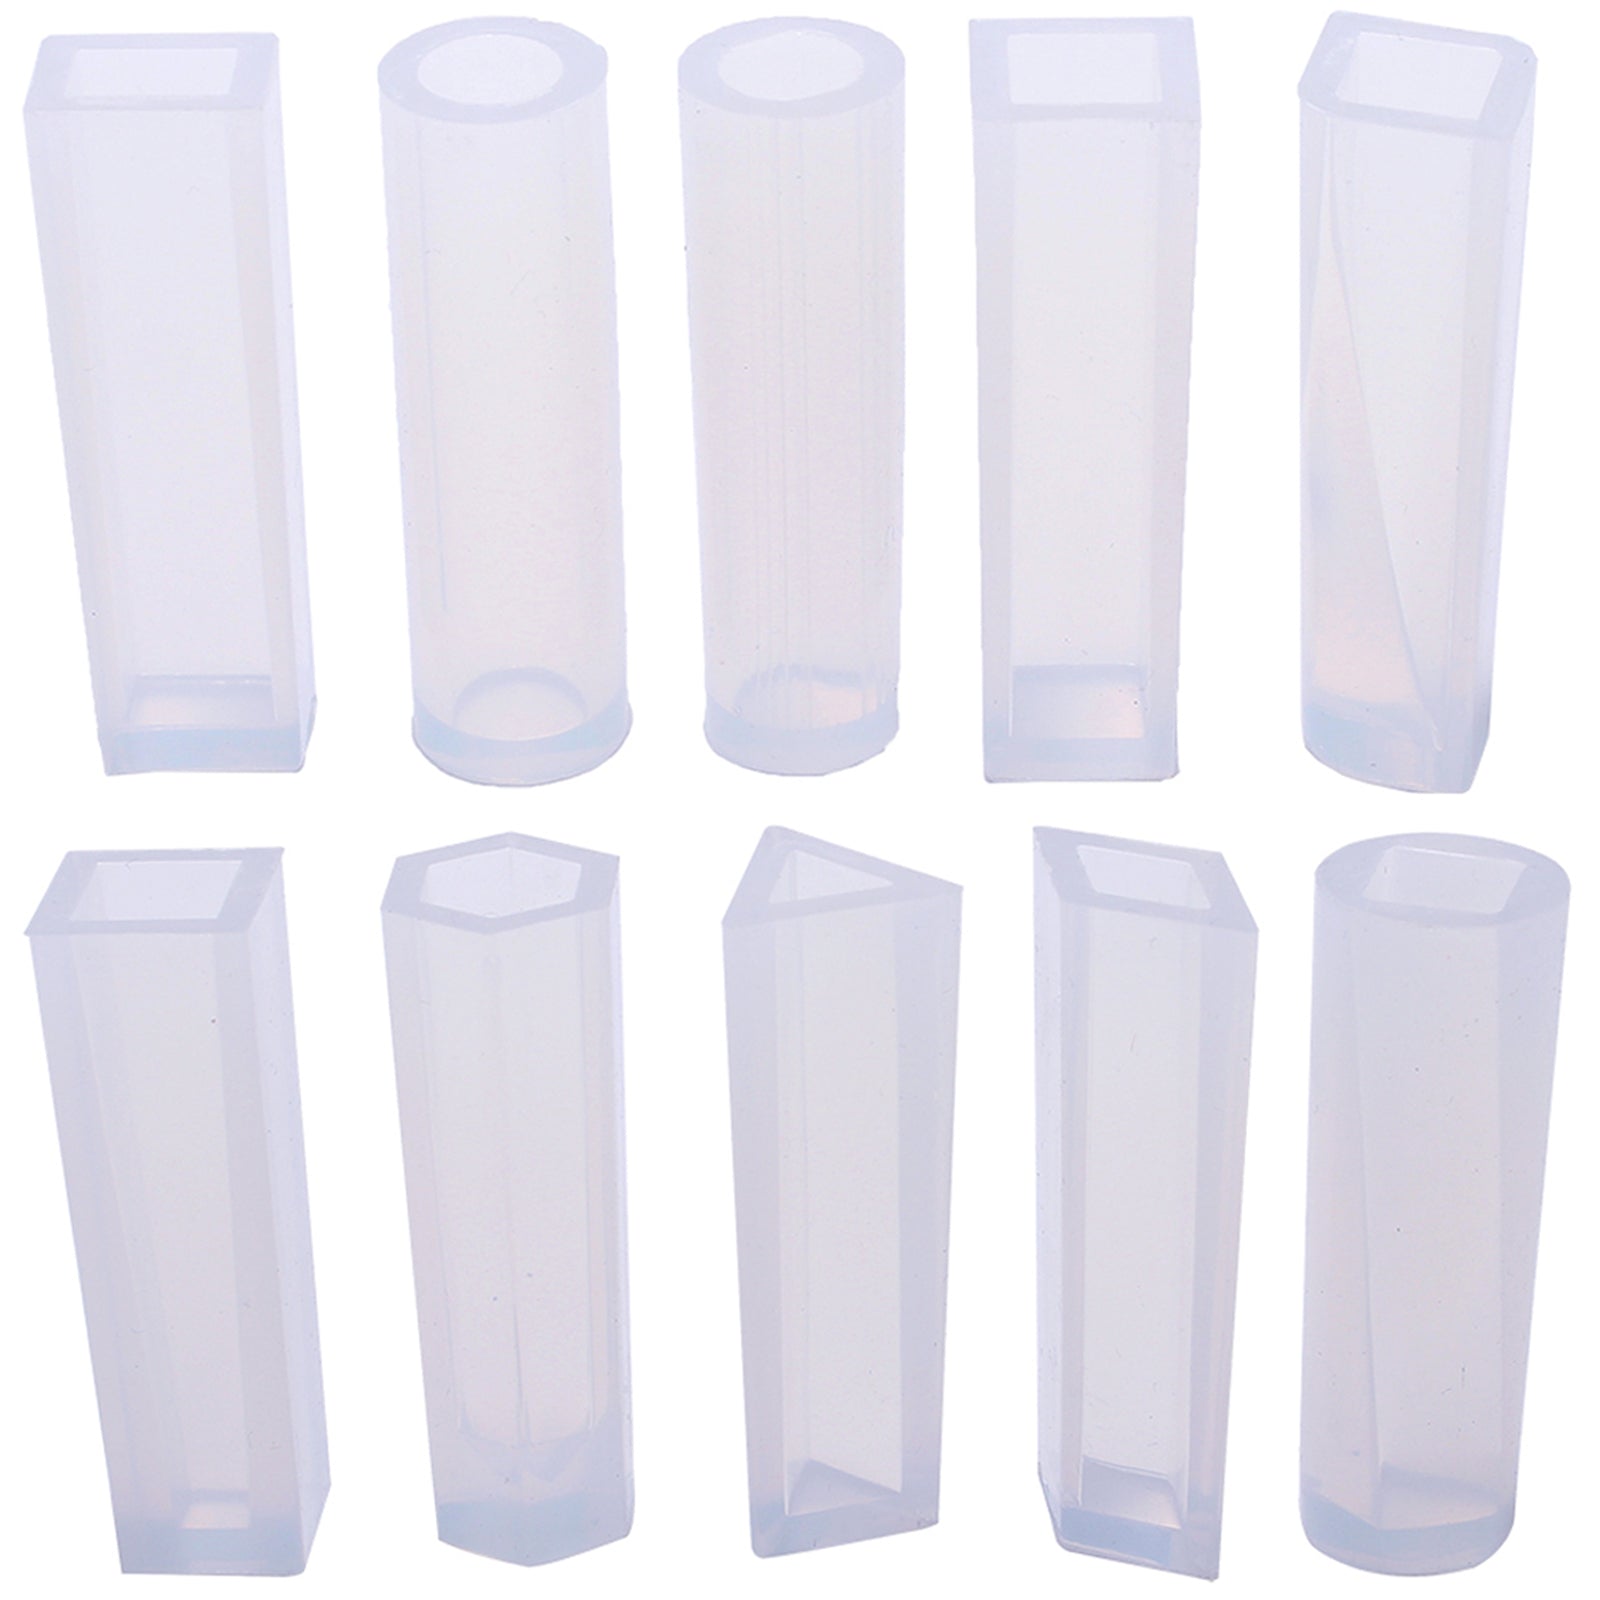 Funshowcase Cylinder Crystal Quartz Wands Resin Silicone Molds 10-Count